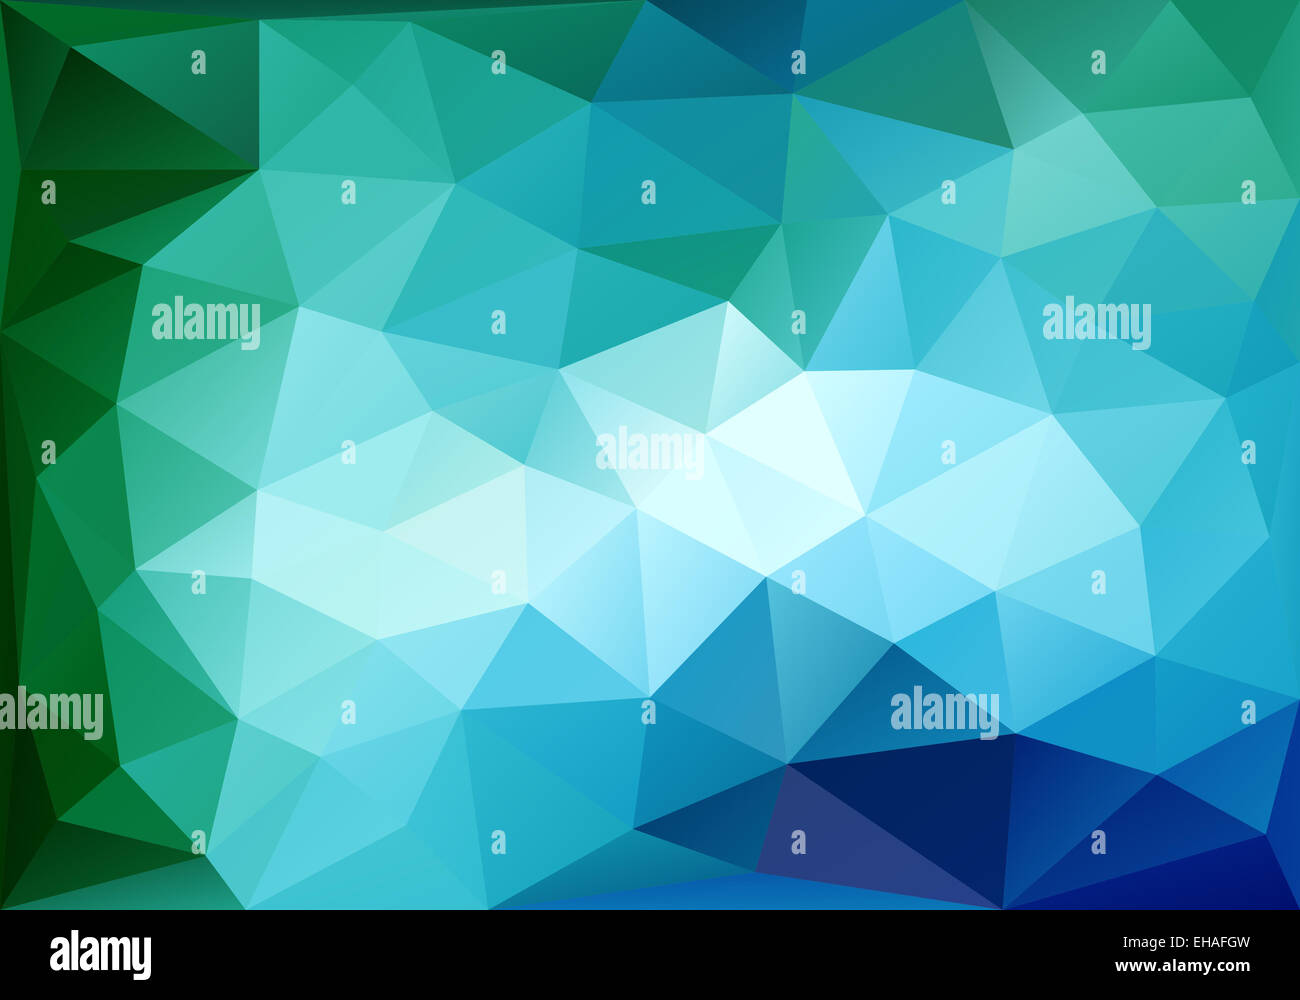 abstract blue and green low poly background, vector design element Stock Photo